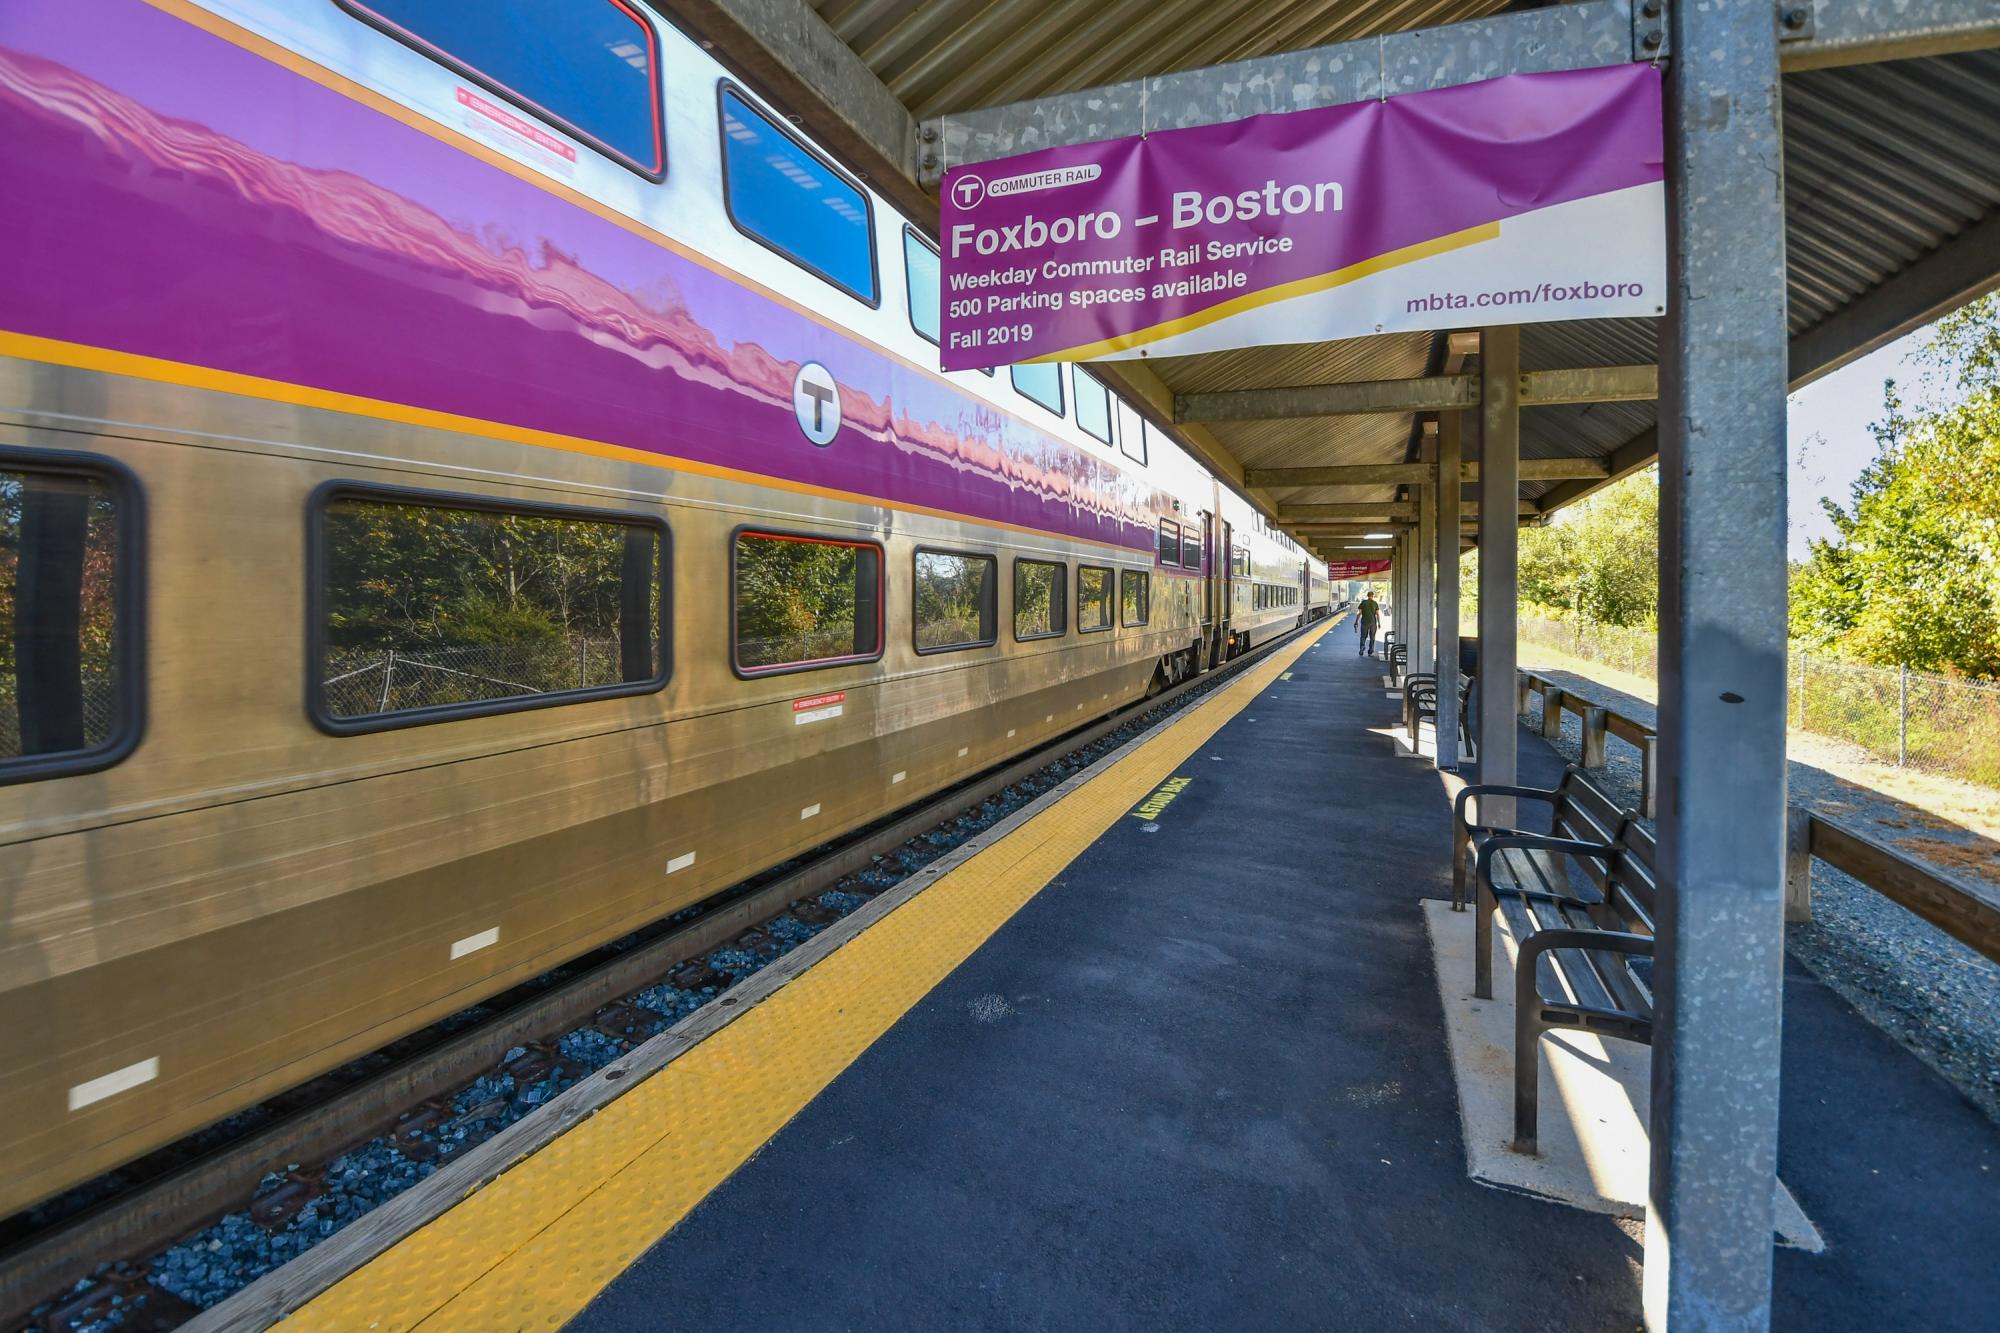 A Commuter Rail train at Foxboro Station's platform, with an advertisting sign for the Foxboro - Boston weekday pilot in the foreground.